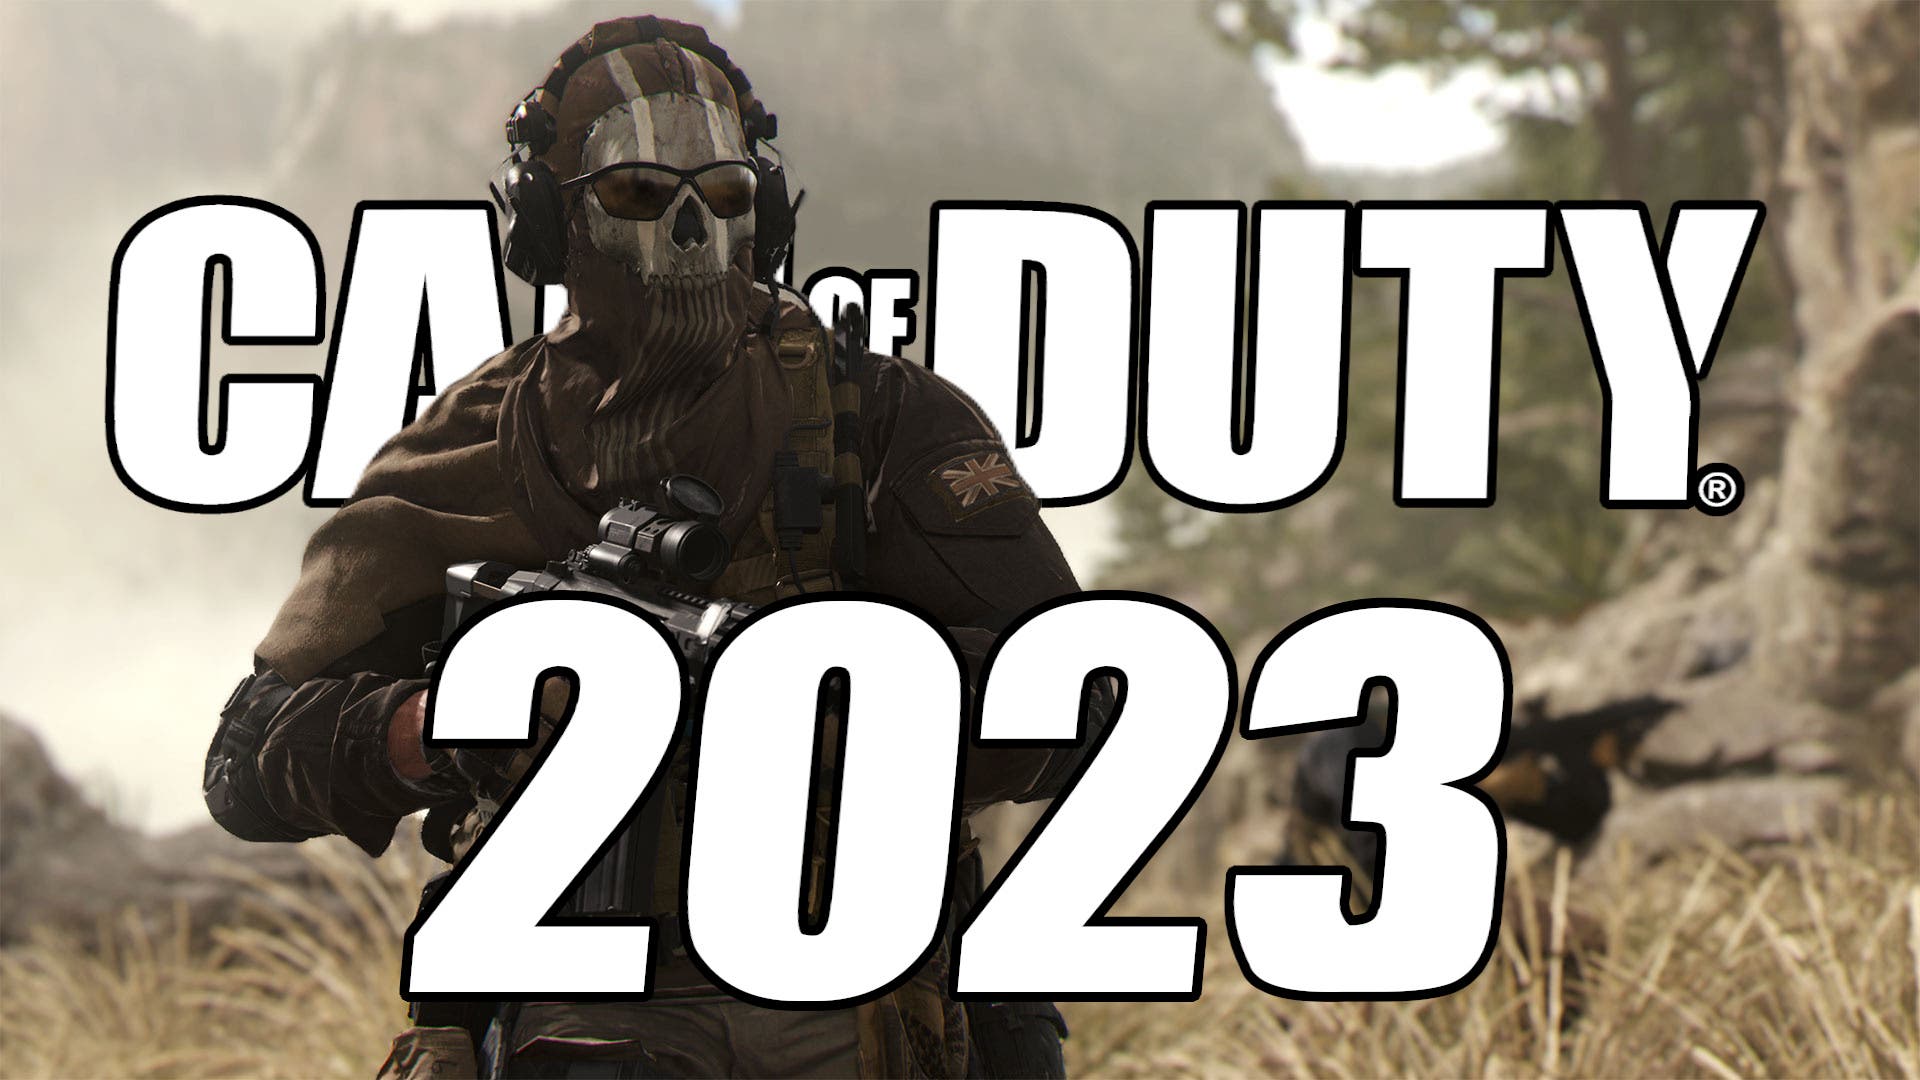 Call of Duty 2023 could be a direct sequel to Modern Warfare 2, according to new clues